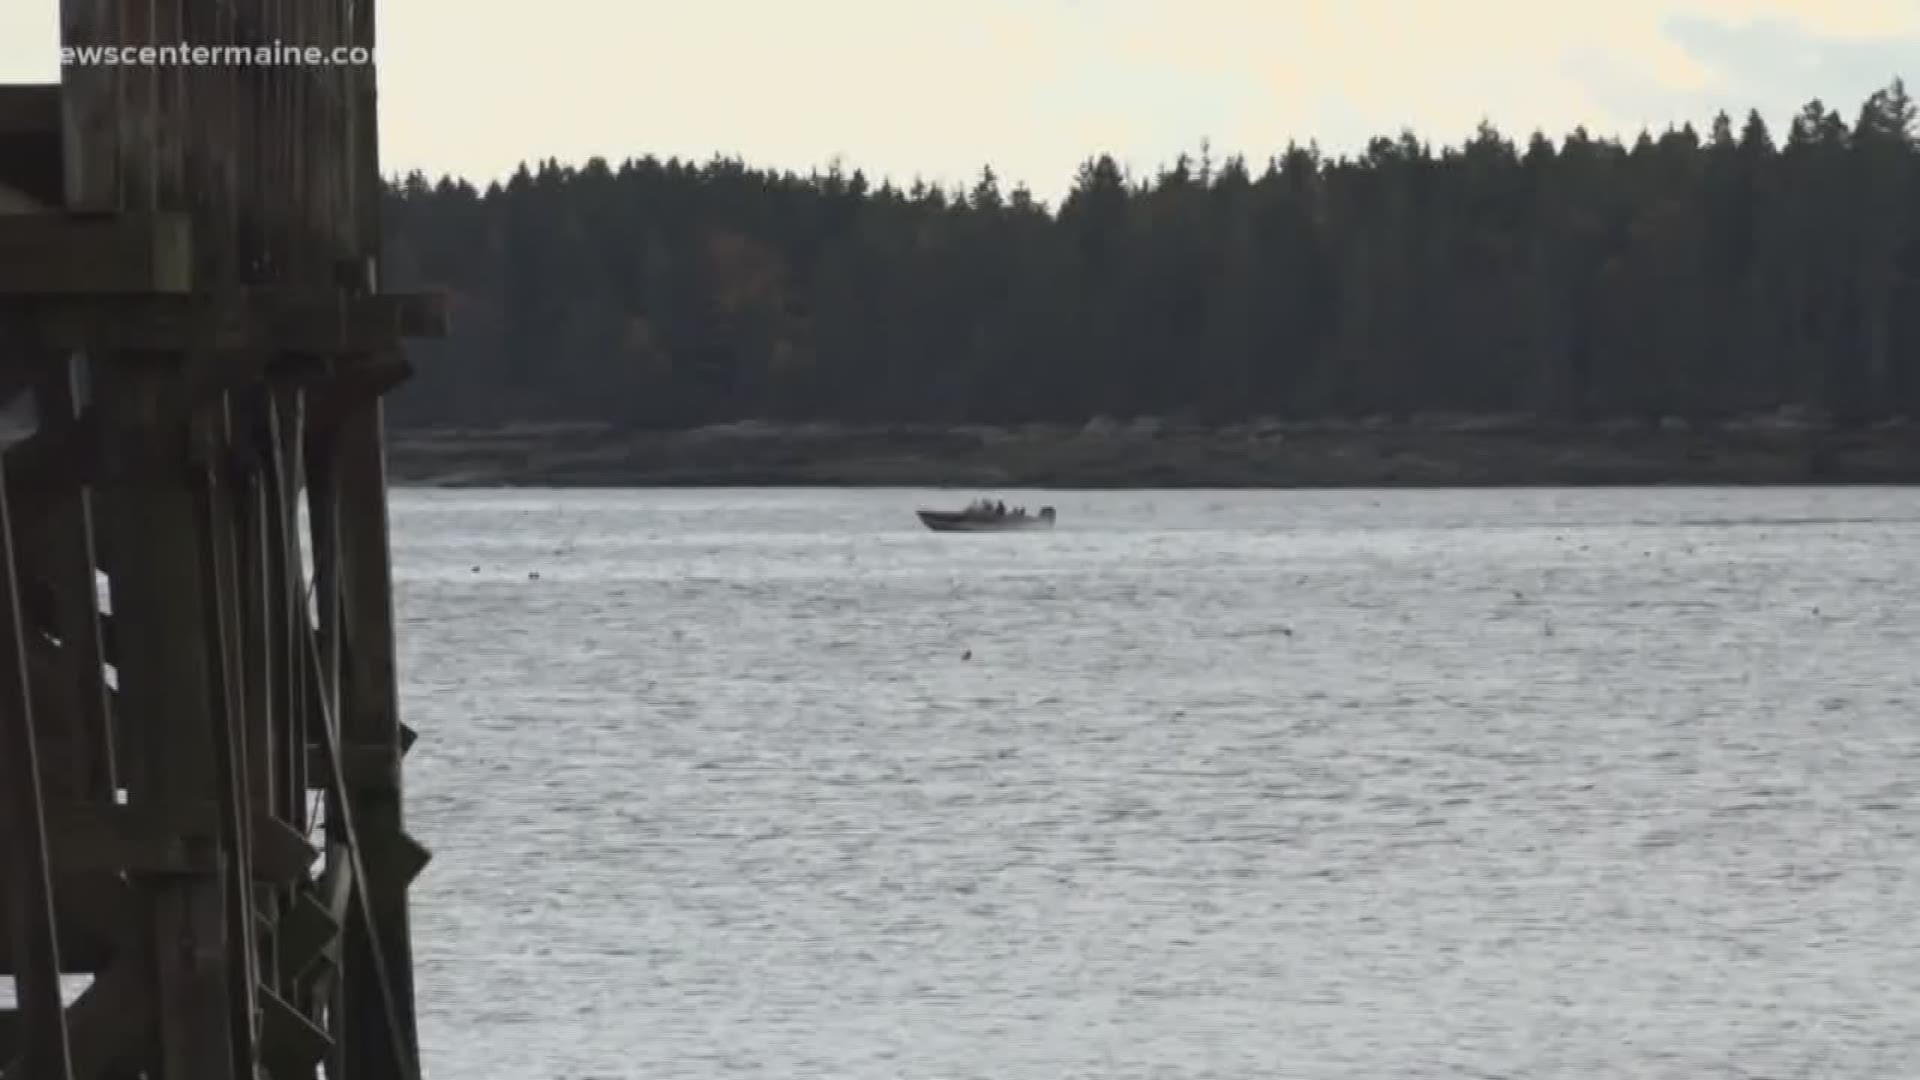 The coast guard says a body has been recovered, and it may be that of a missing fisherman near Doyle Island.